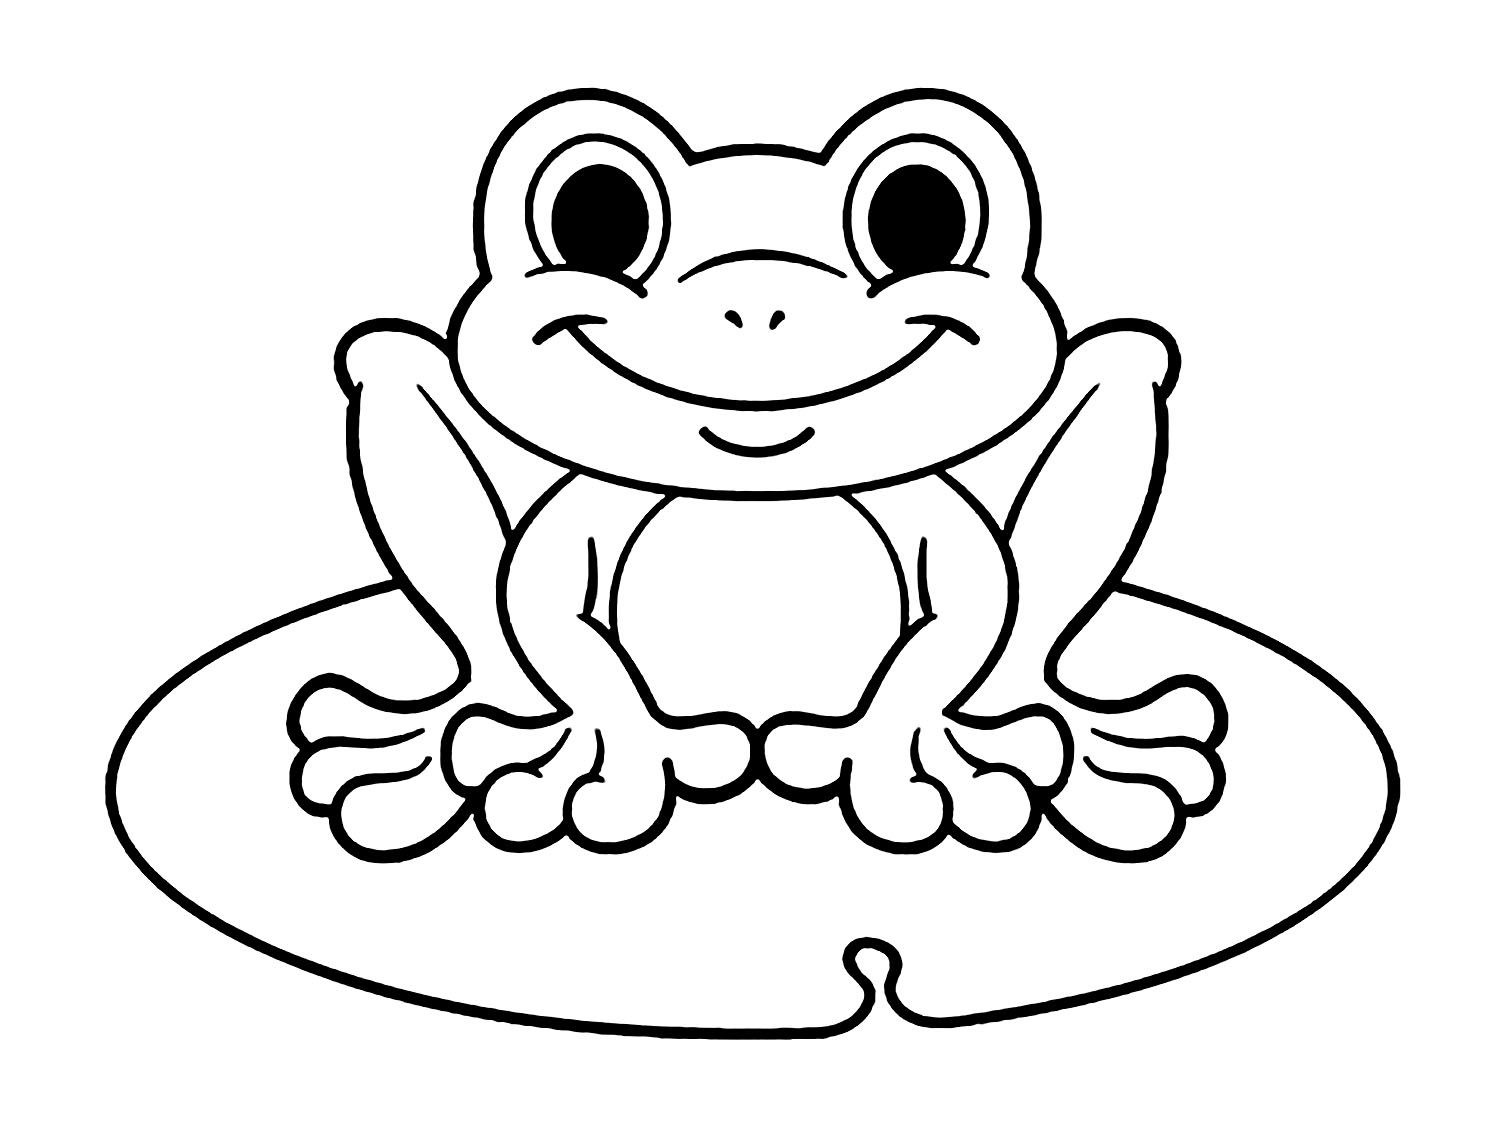 Frog coloring page to print Frogs Kids Coloring Pages